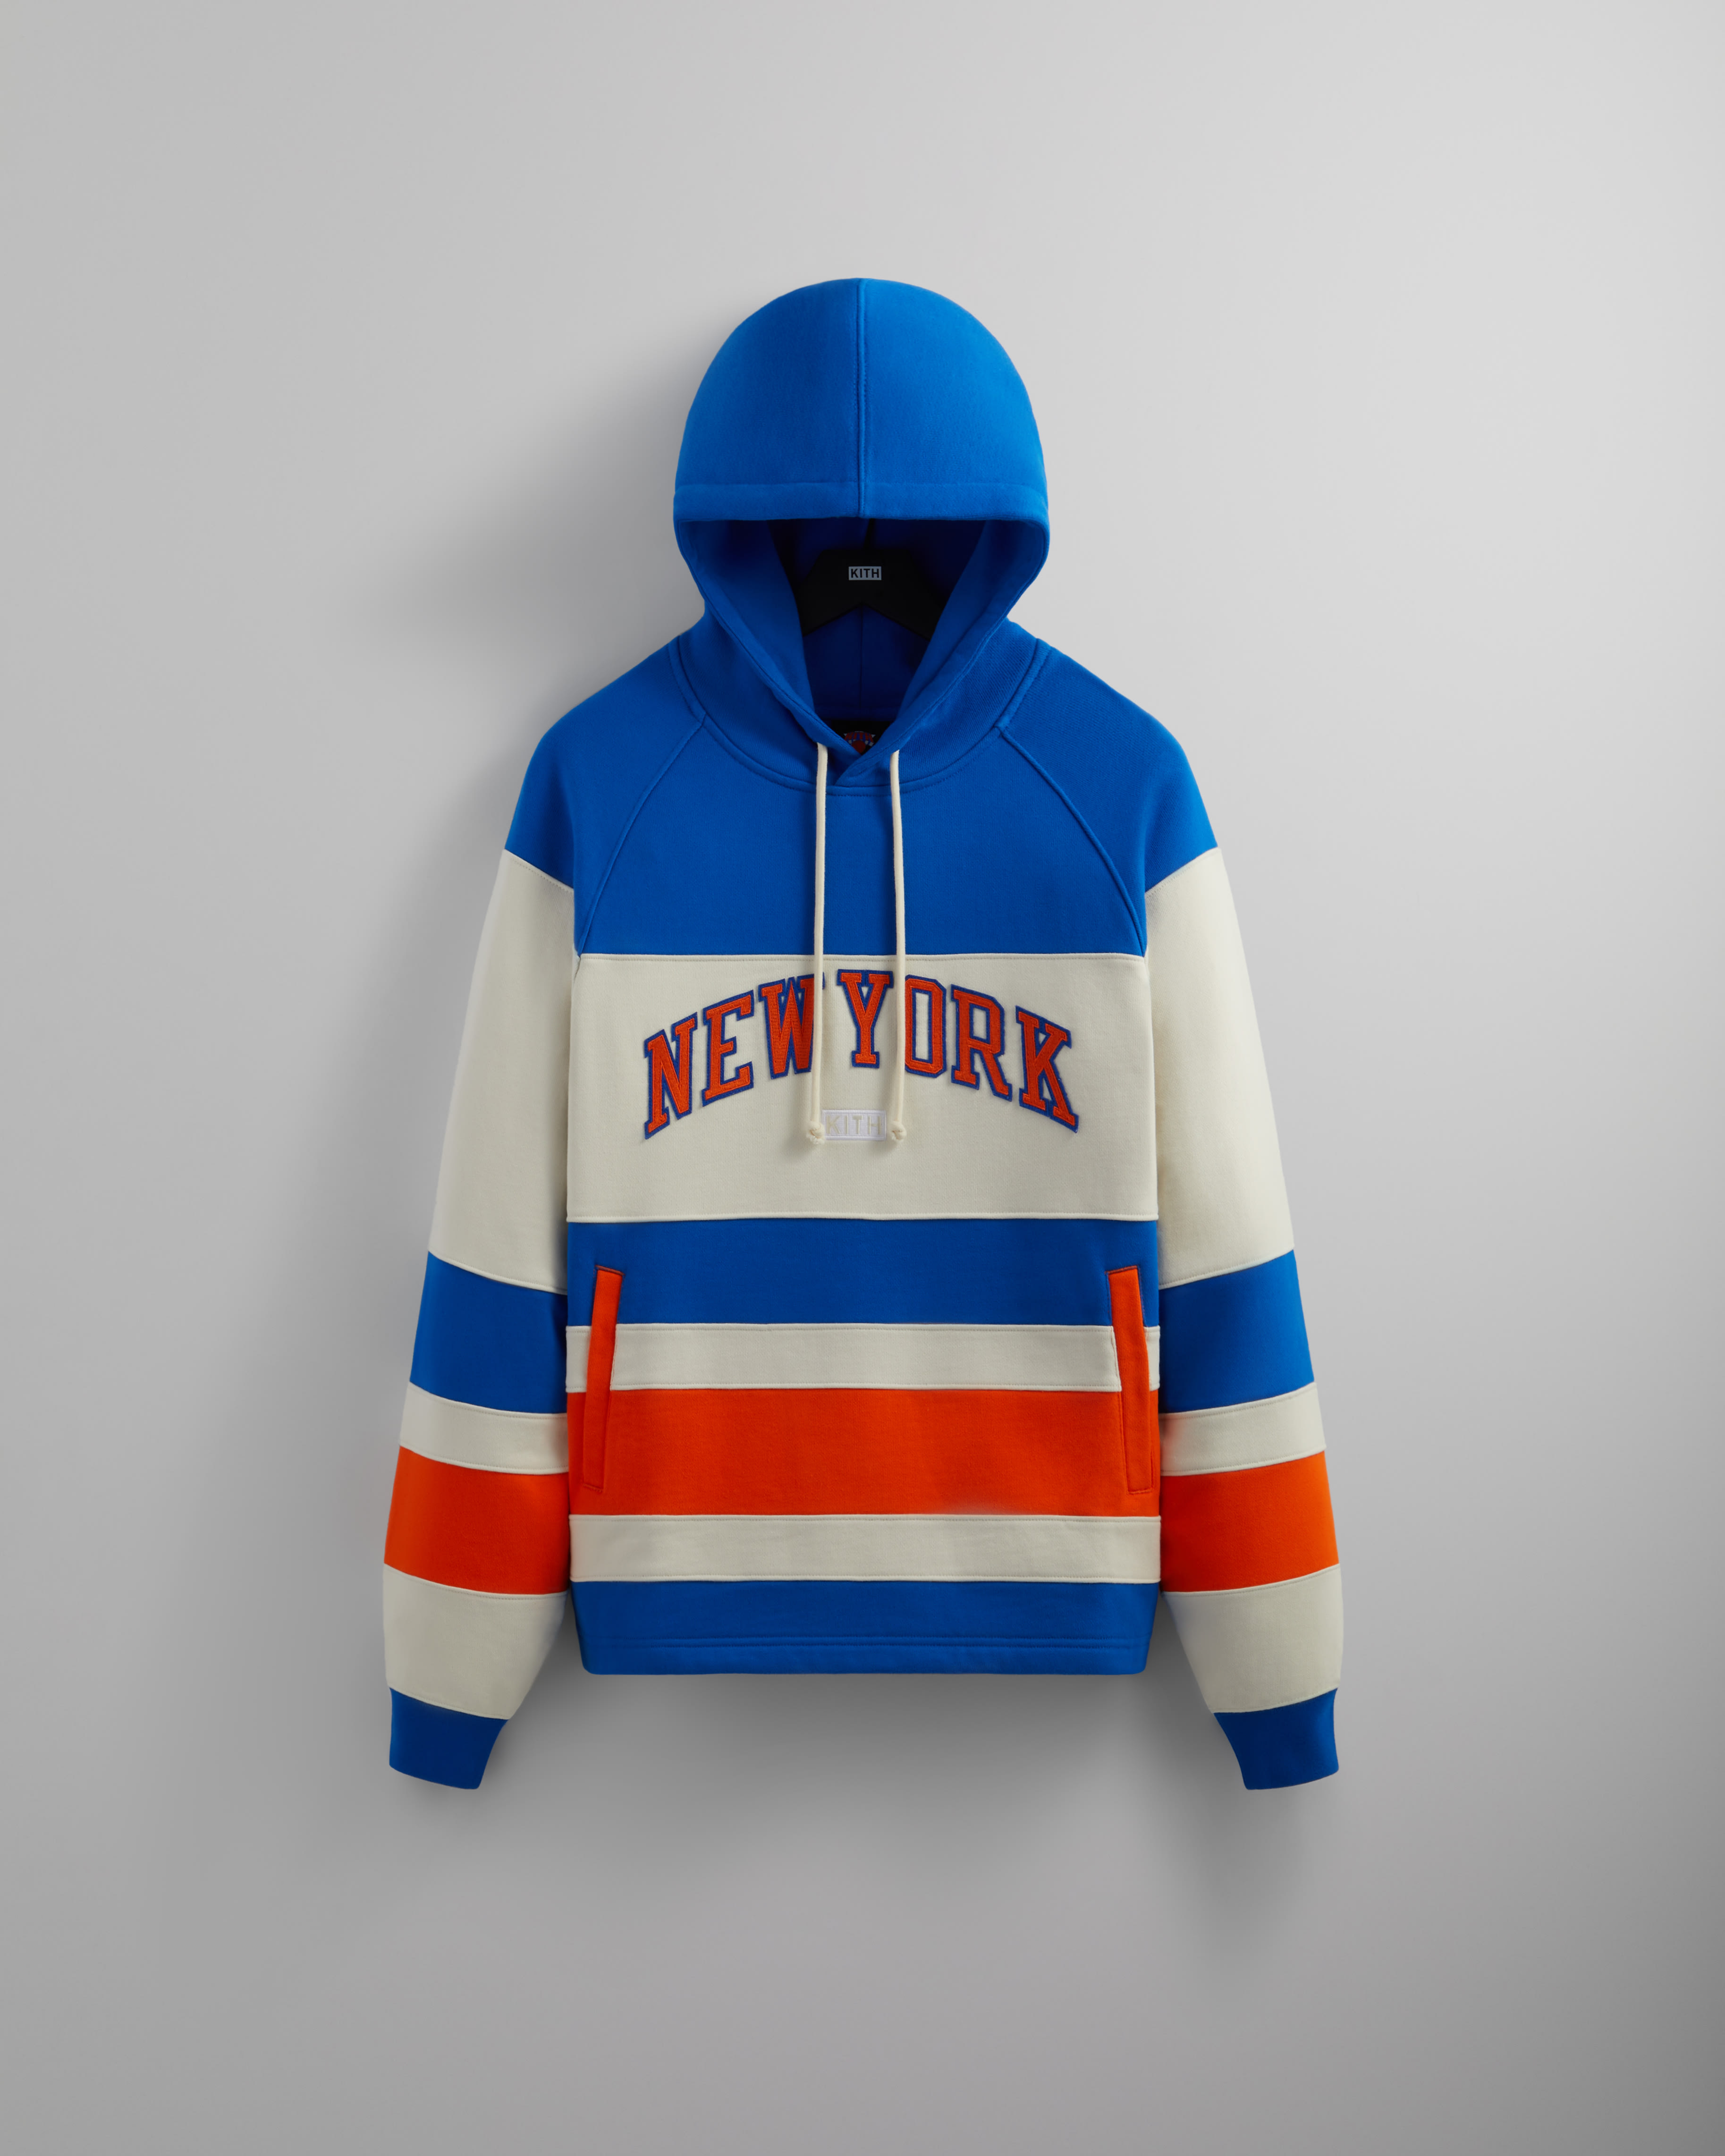 The Kith and New York Knicks 2022 collection